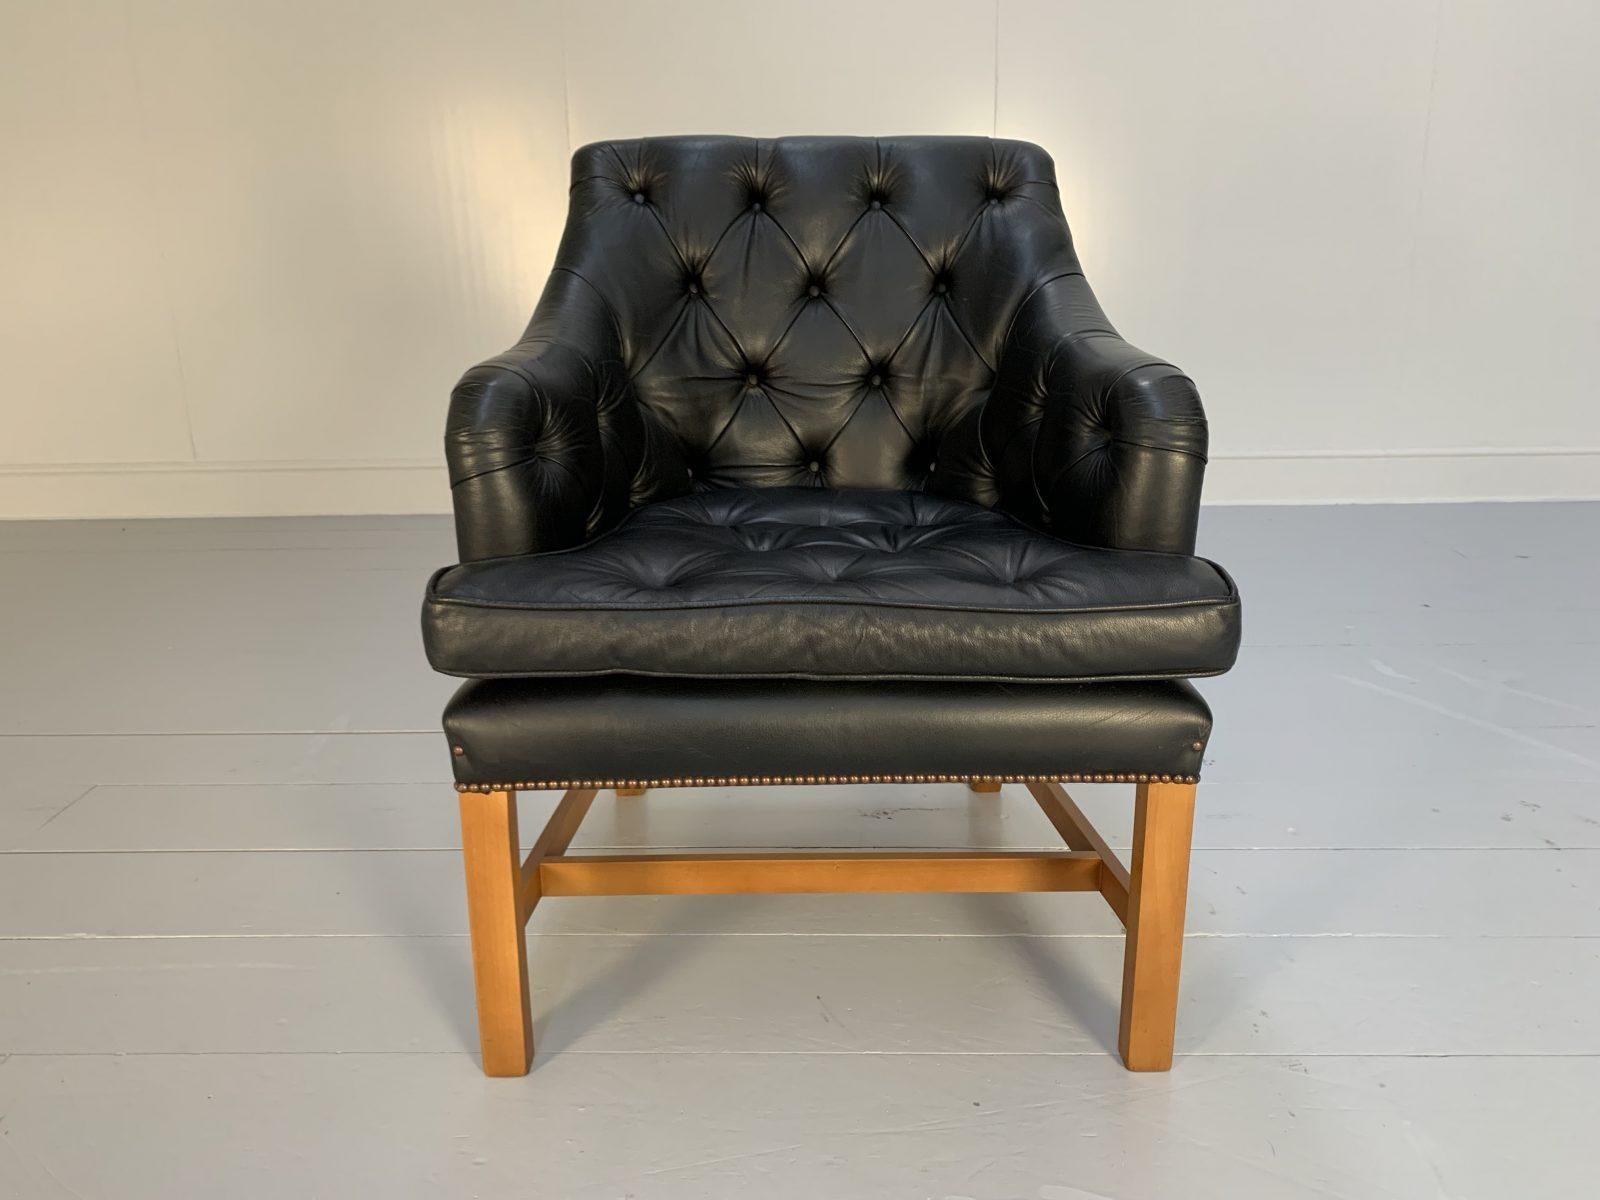 Hello Friends.
On offer on this occasion is perhaps the last armchair you need ever buy, it being a superb George Smith “Georgian” Armchair dressed in a Peerless, elegant, top-grade and sensationally-tactile, hand-coloured, antiqued leather in